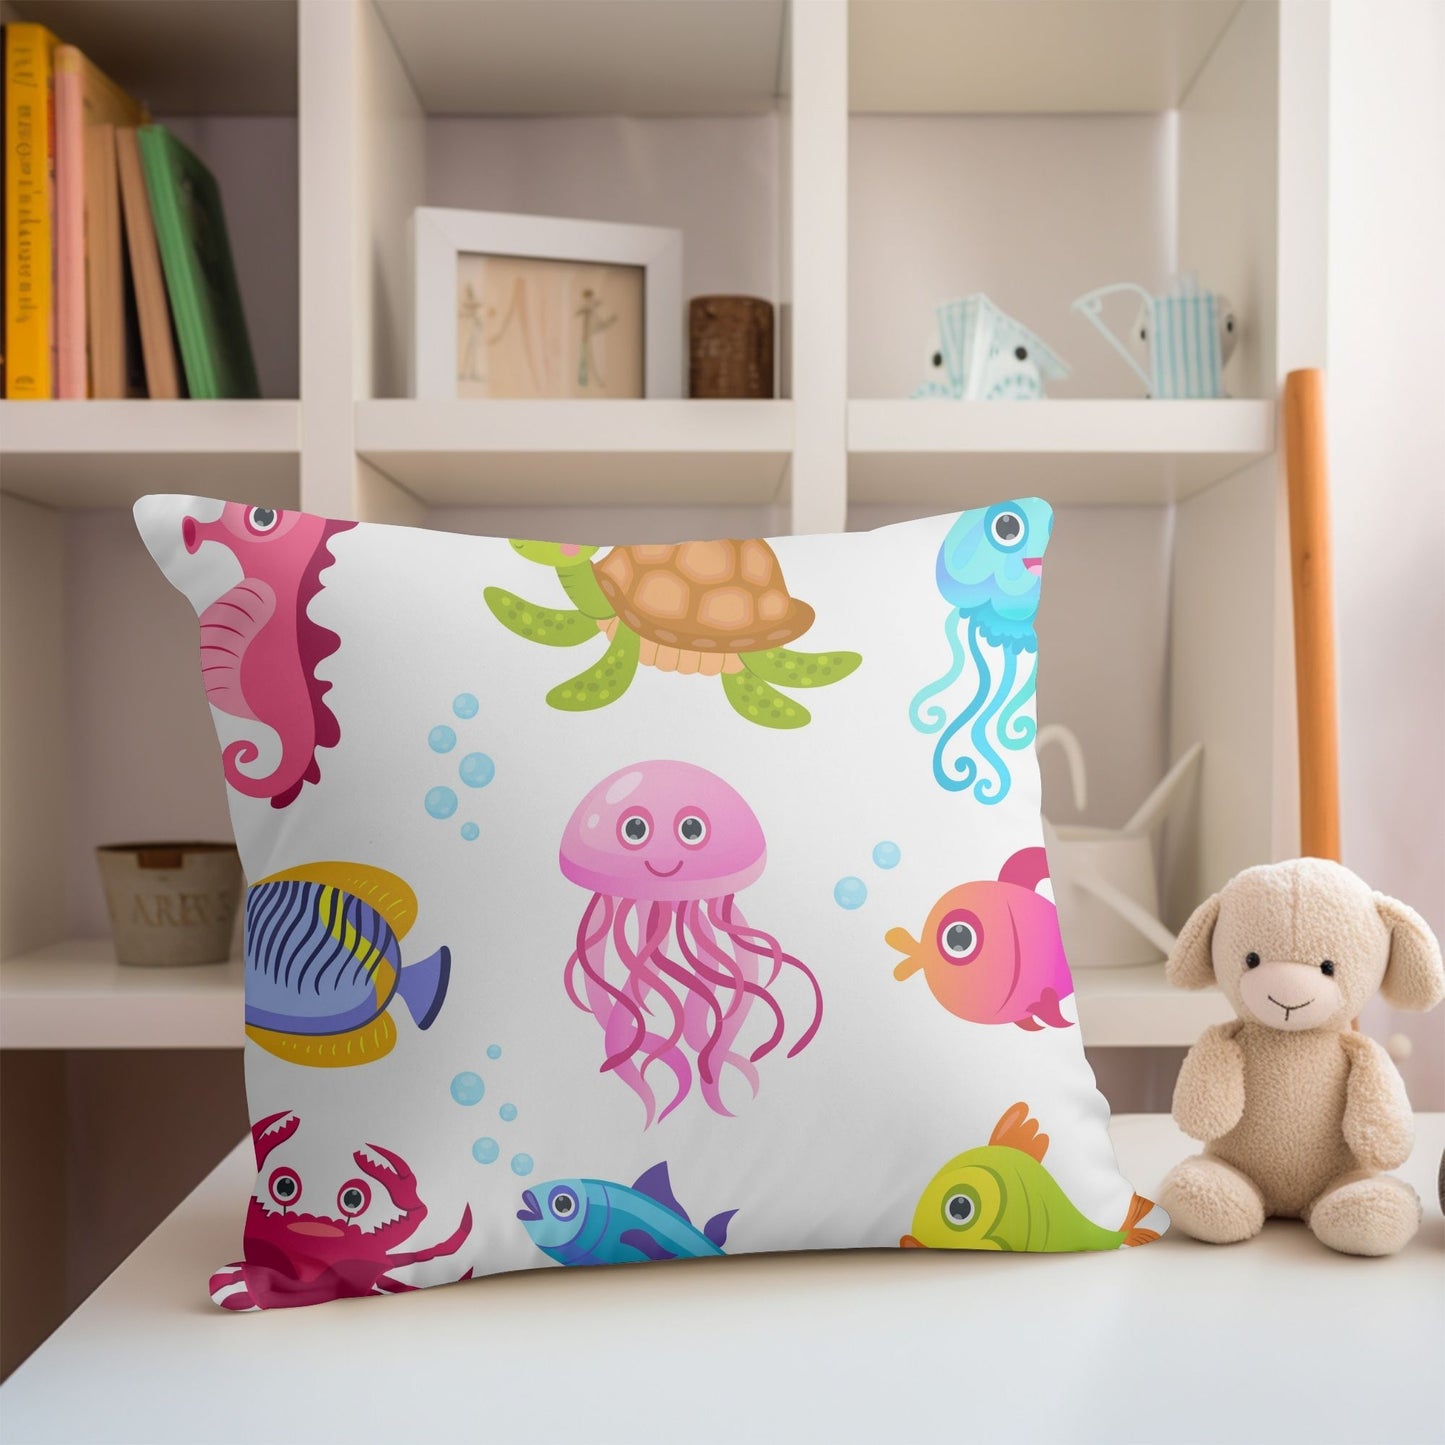 Cozy sea animals patterned kids pillow for naptime.